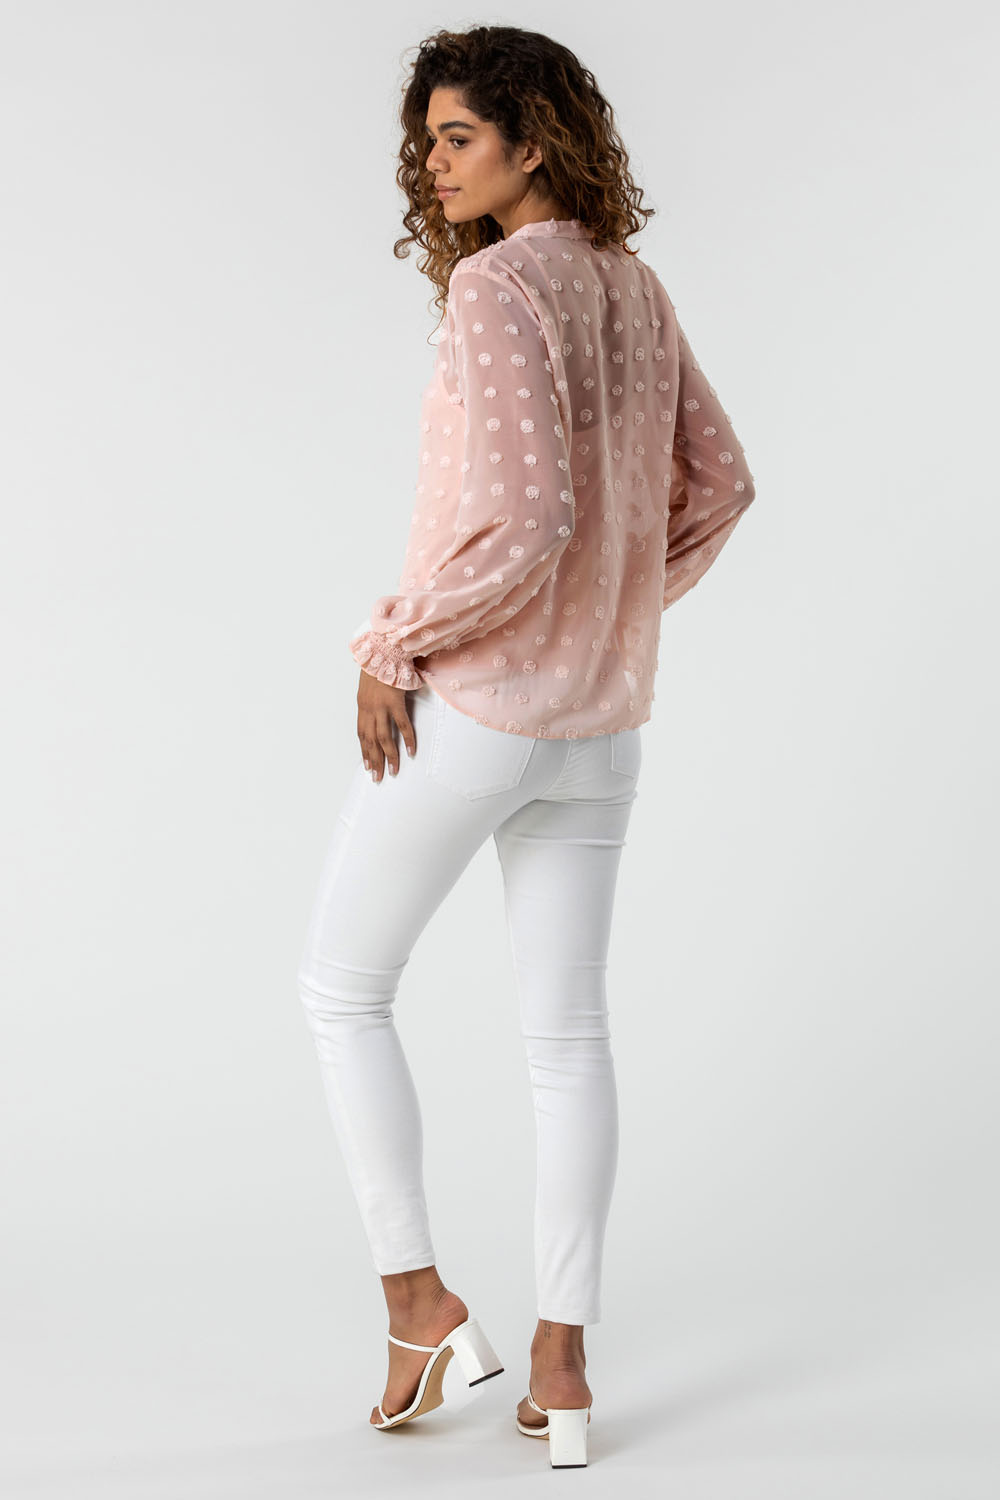 Light Pink Textured Spot Blouse with Cami Top, Image 2 of 4